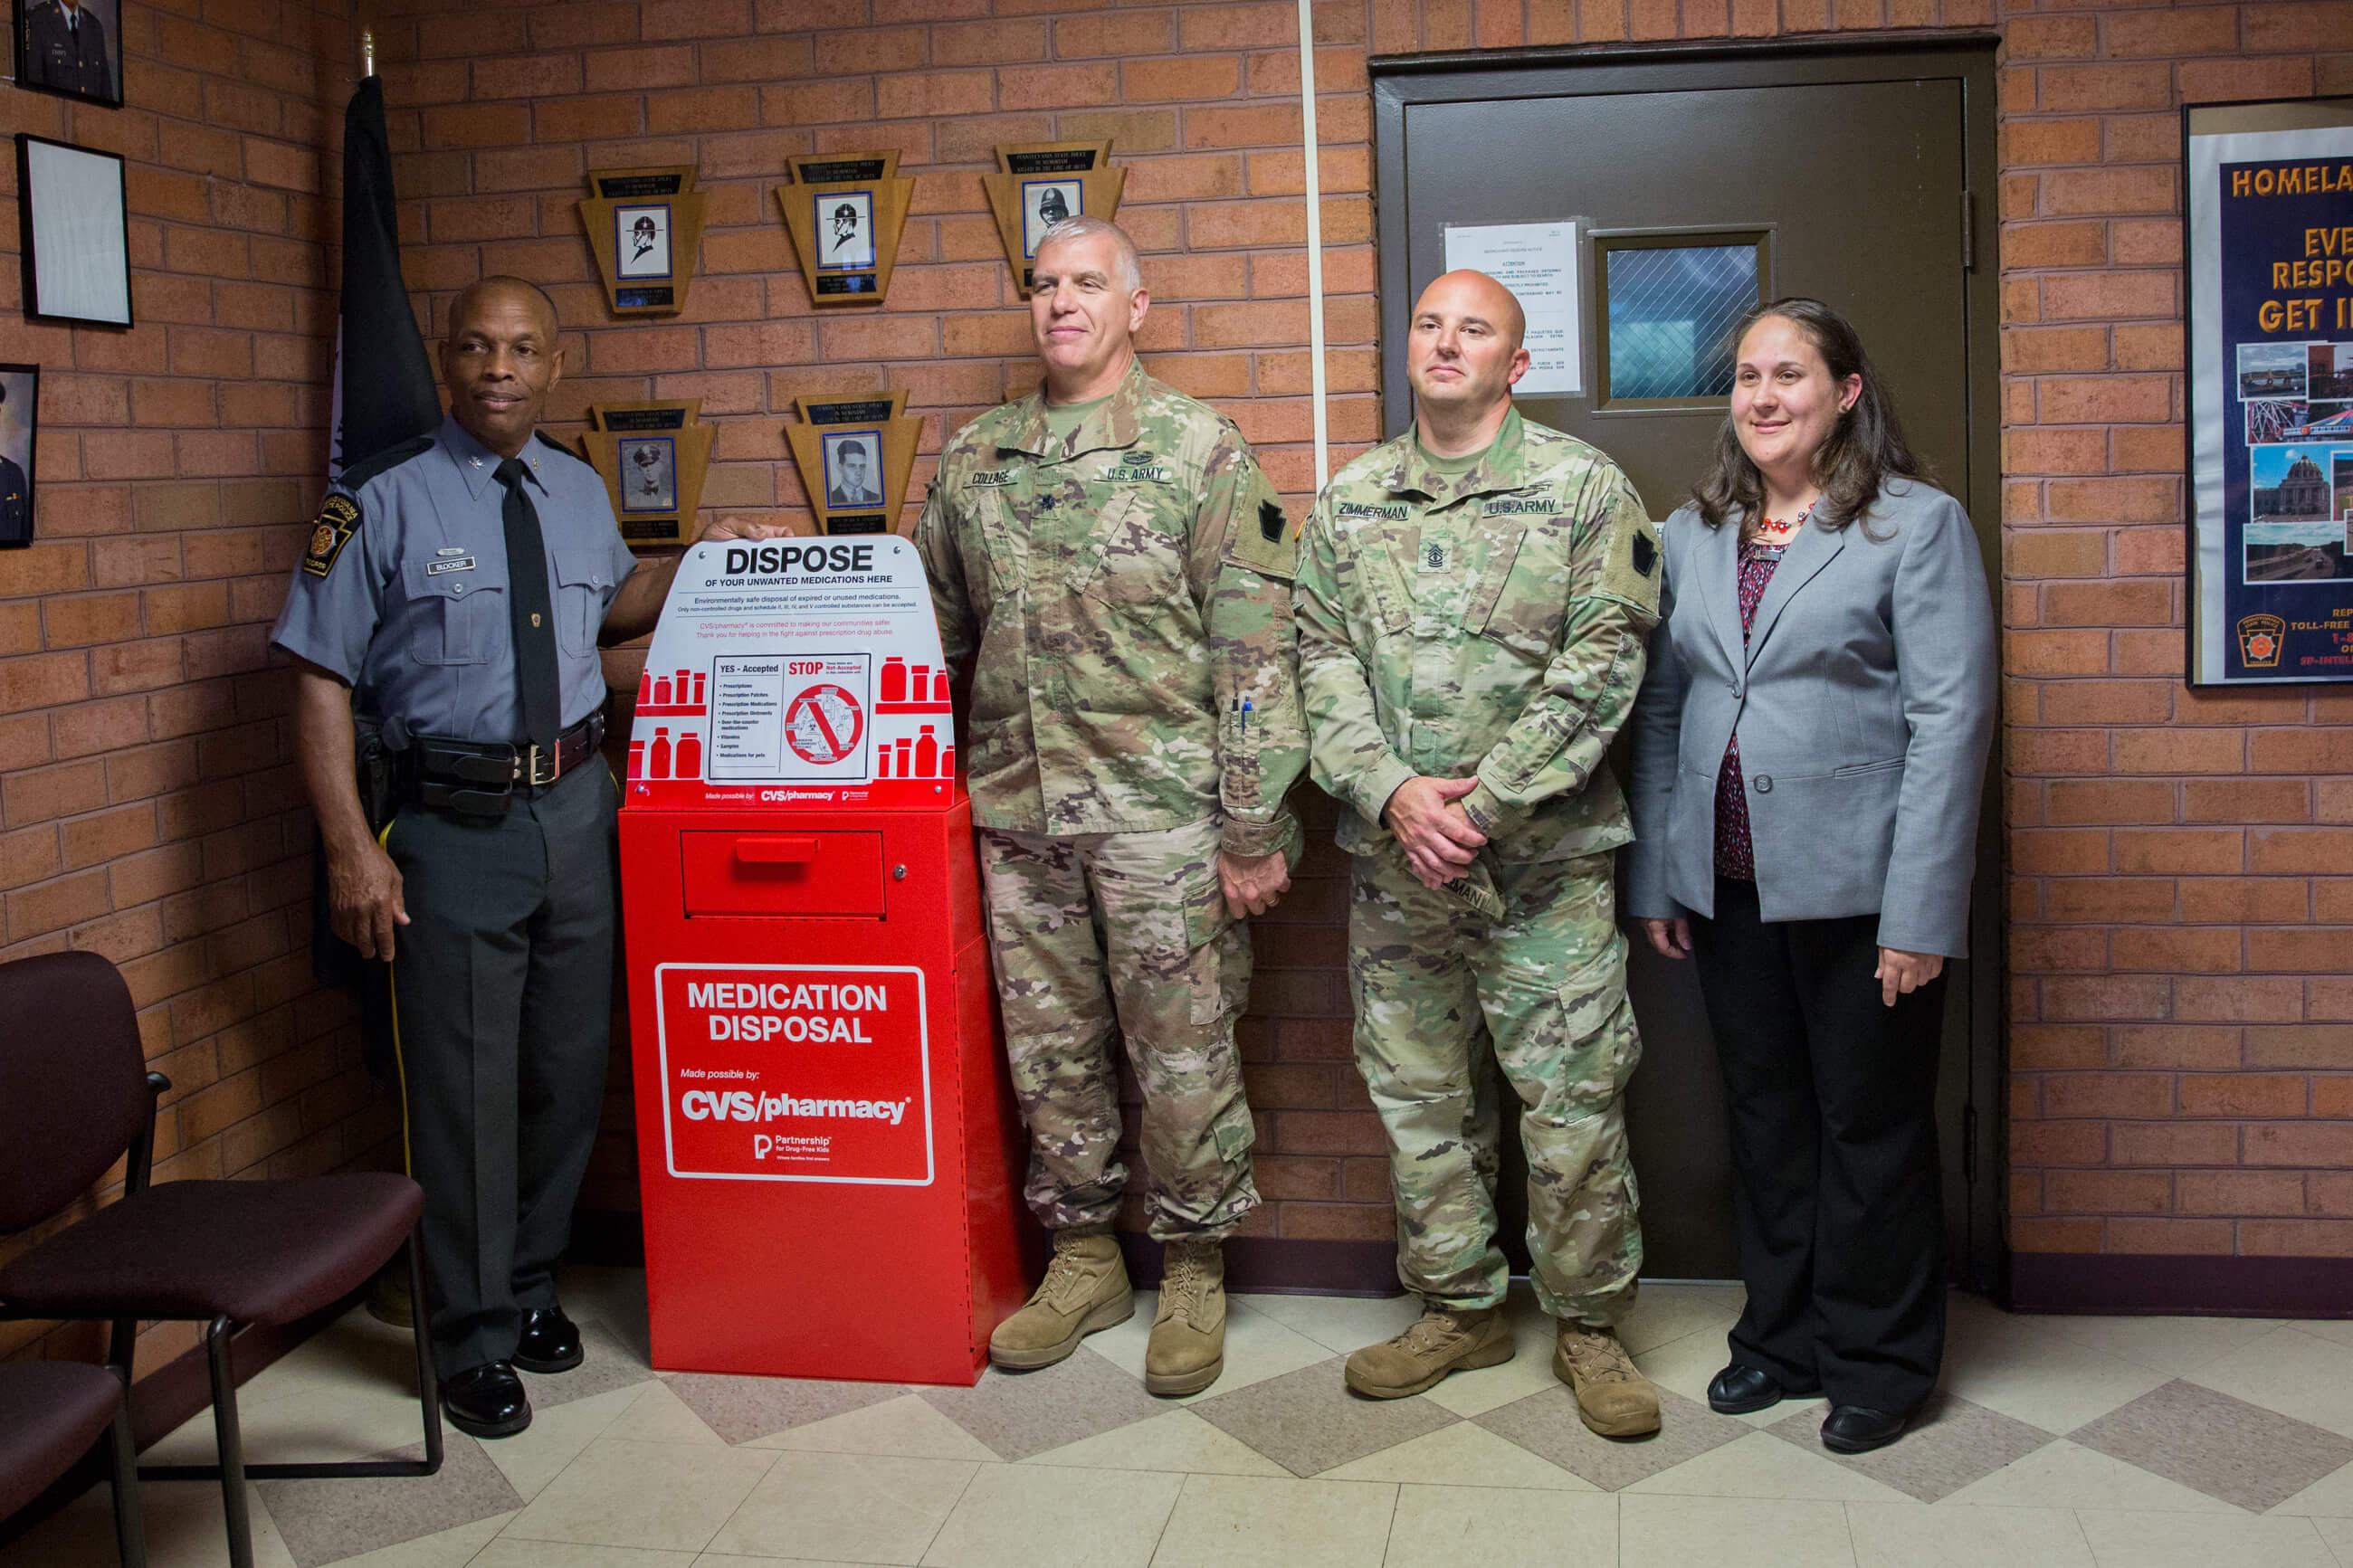 Members of the PA National Guard joined Commissioner Blocker for the collection bin donation event.